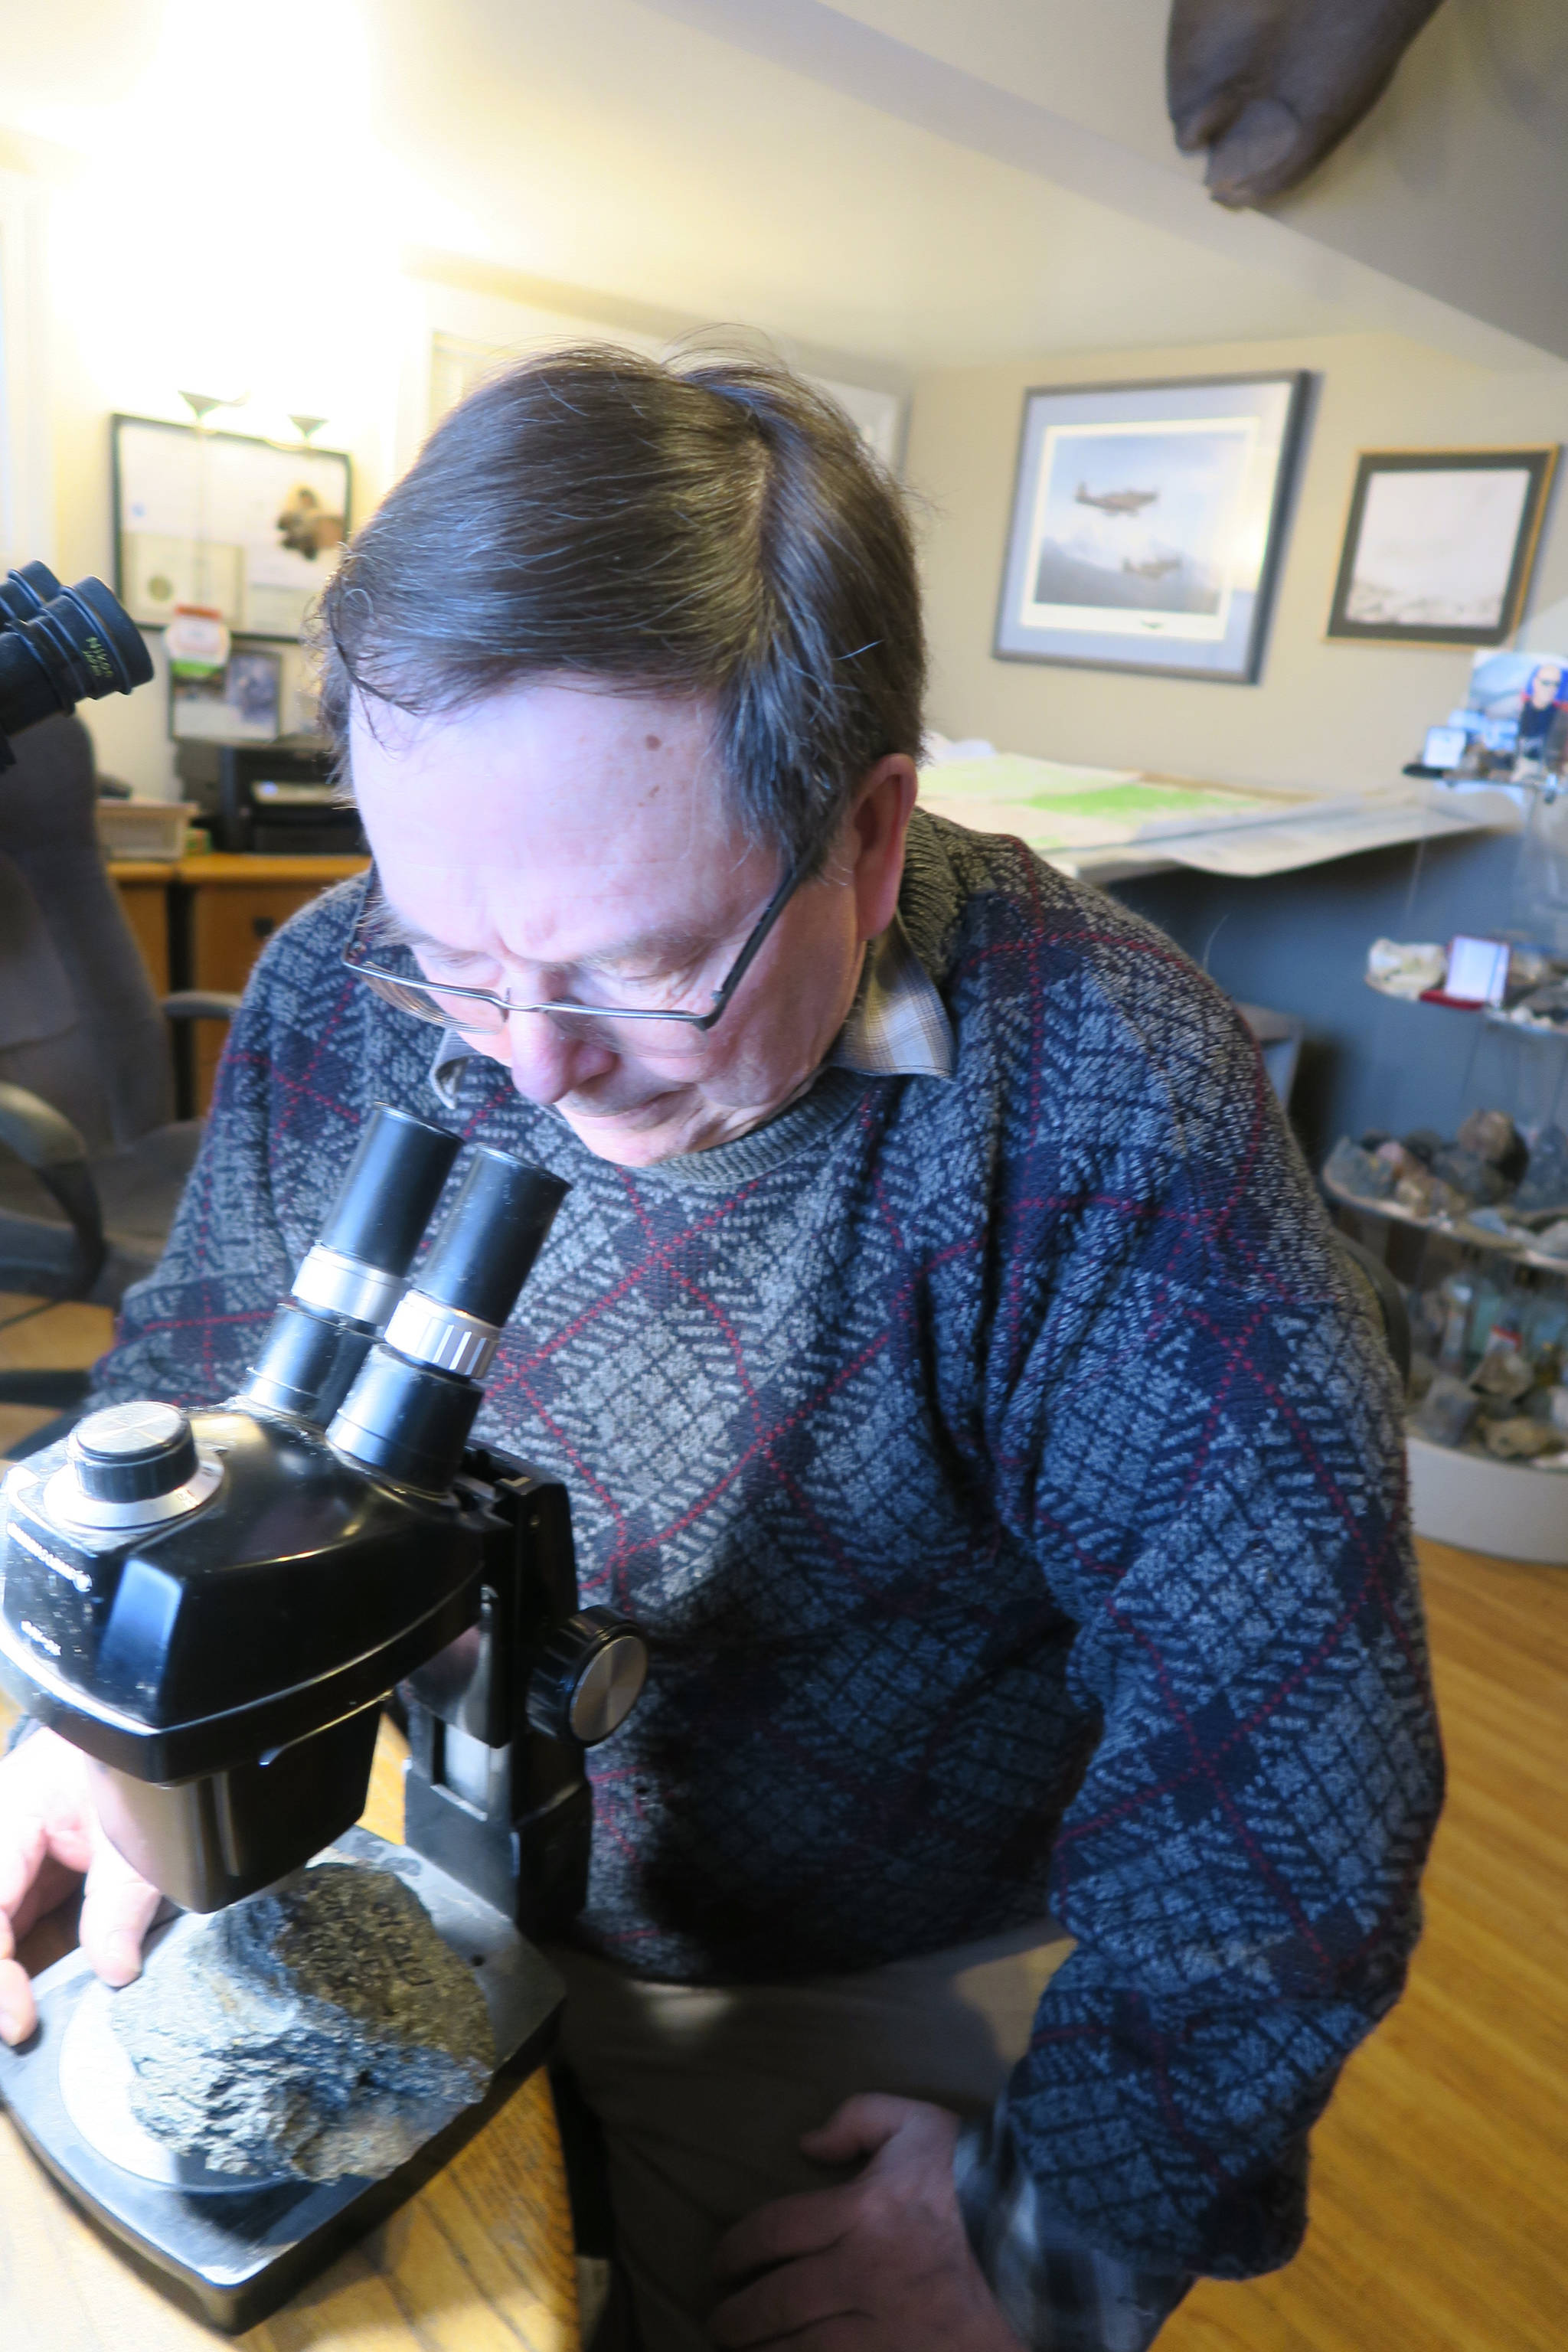 Geologist Tom Bundtzen uses a binocular microscope to look at one of the oldest rocks in Alaska, which formed more than 2 billion years ago and was found near Iditarod. (Courtesy Photo | Cheryl Bradley)